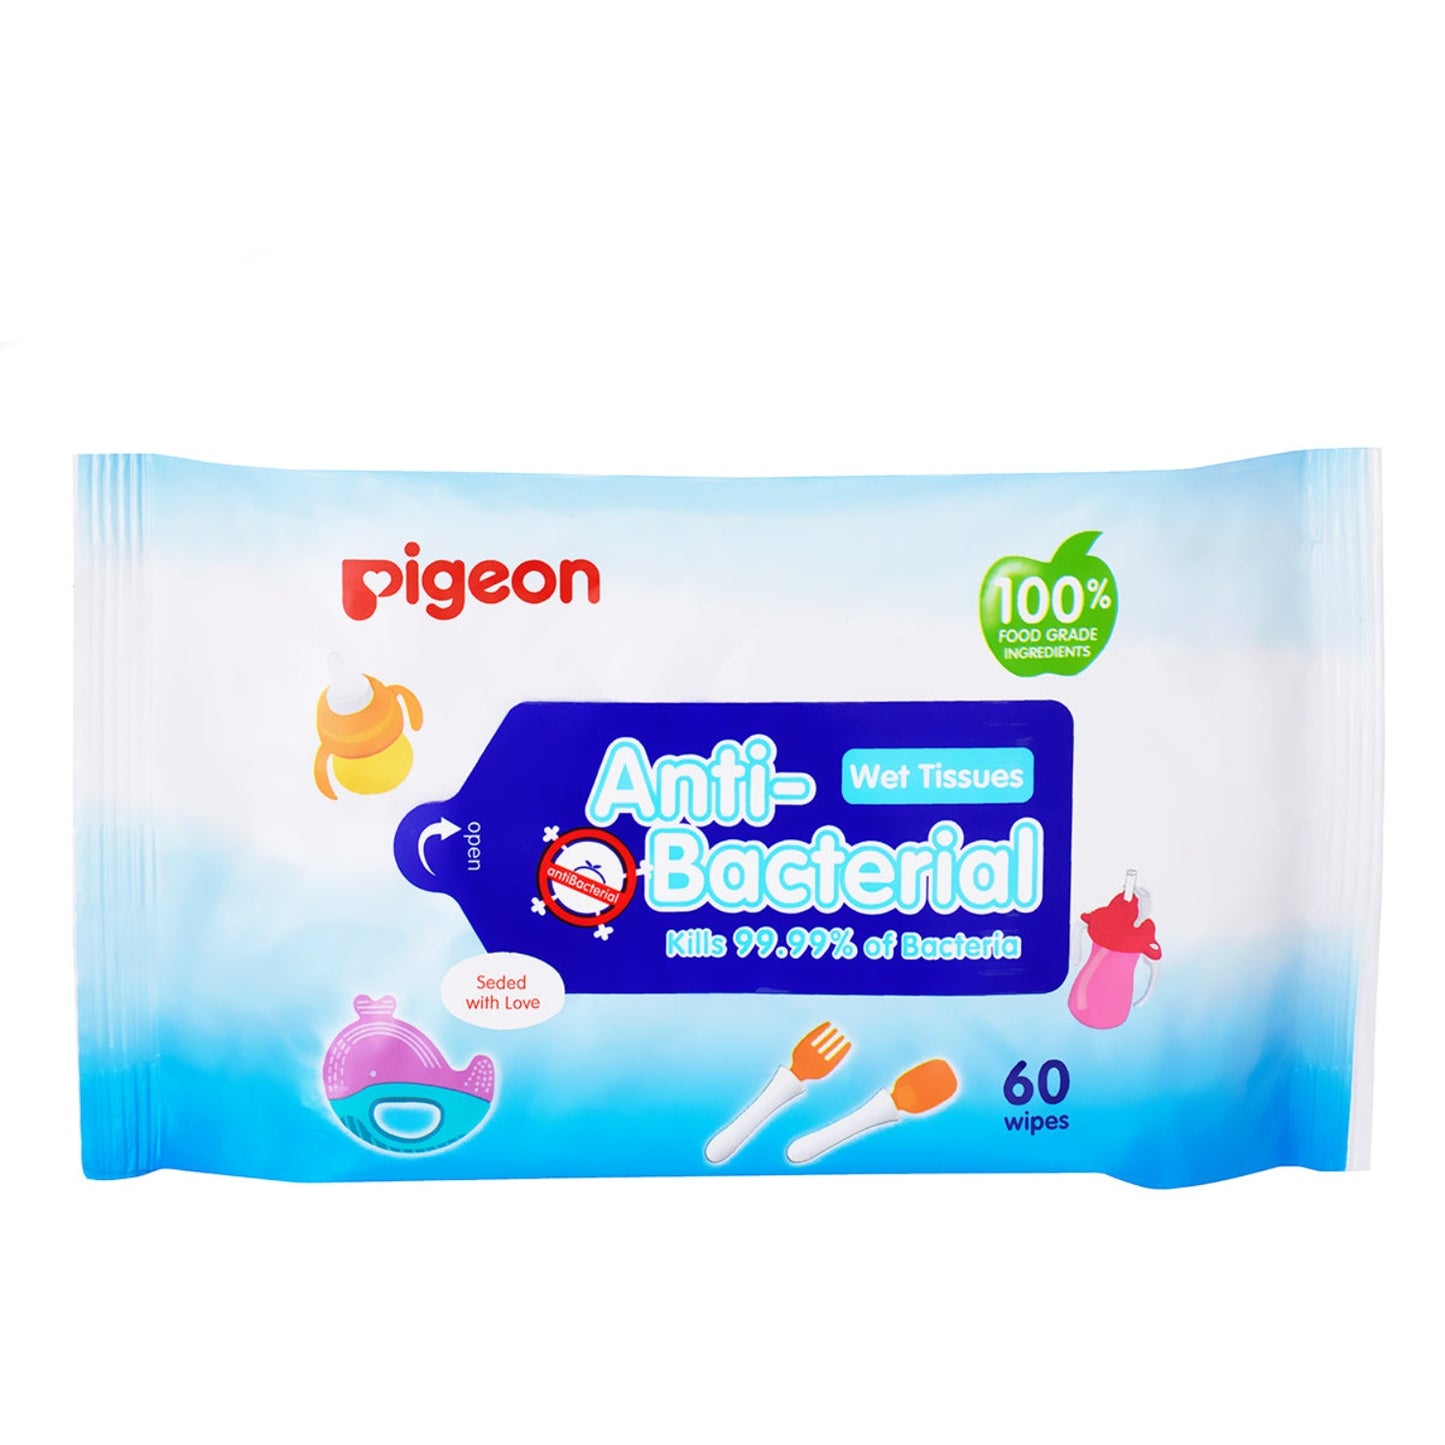 Pigeon Anti-Bacterial Wipes 60 Sheets